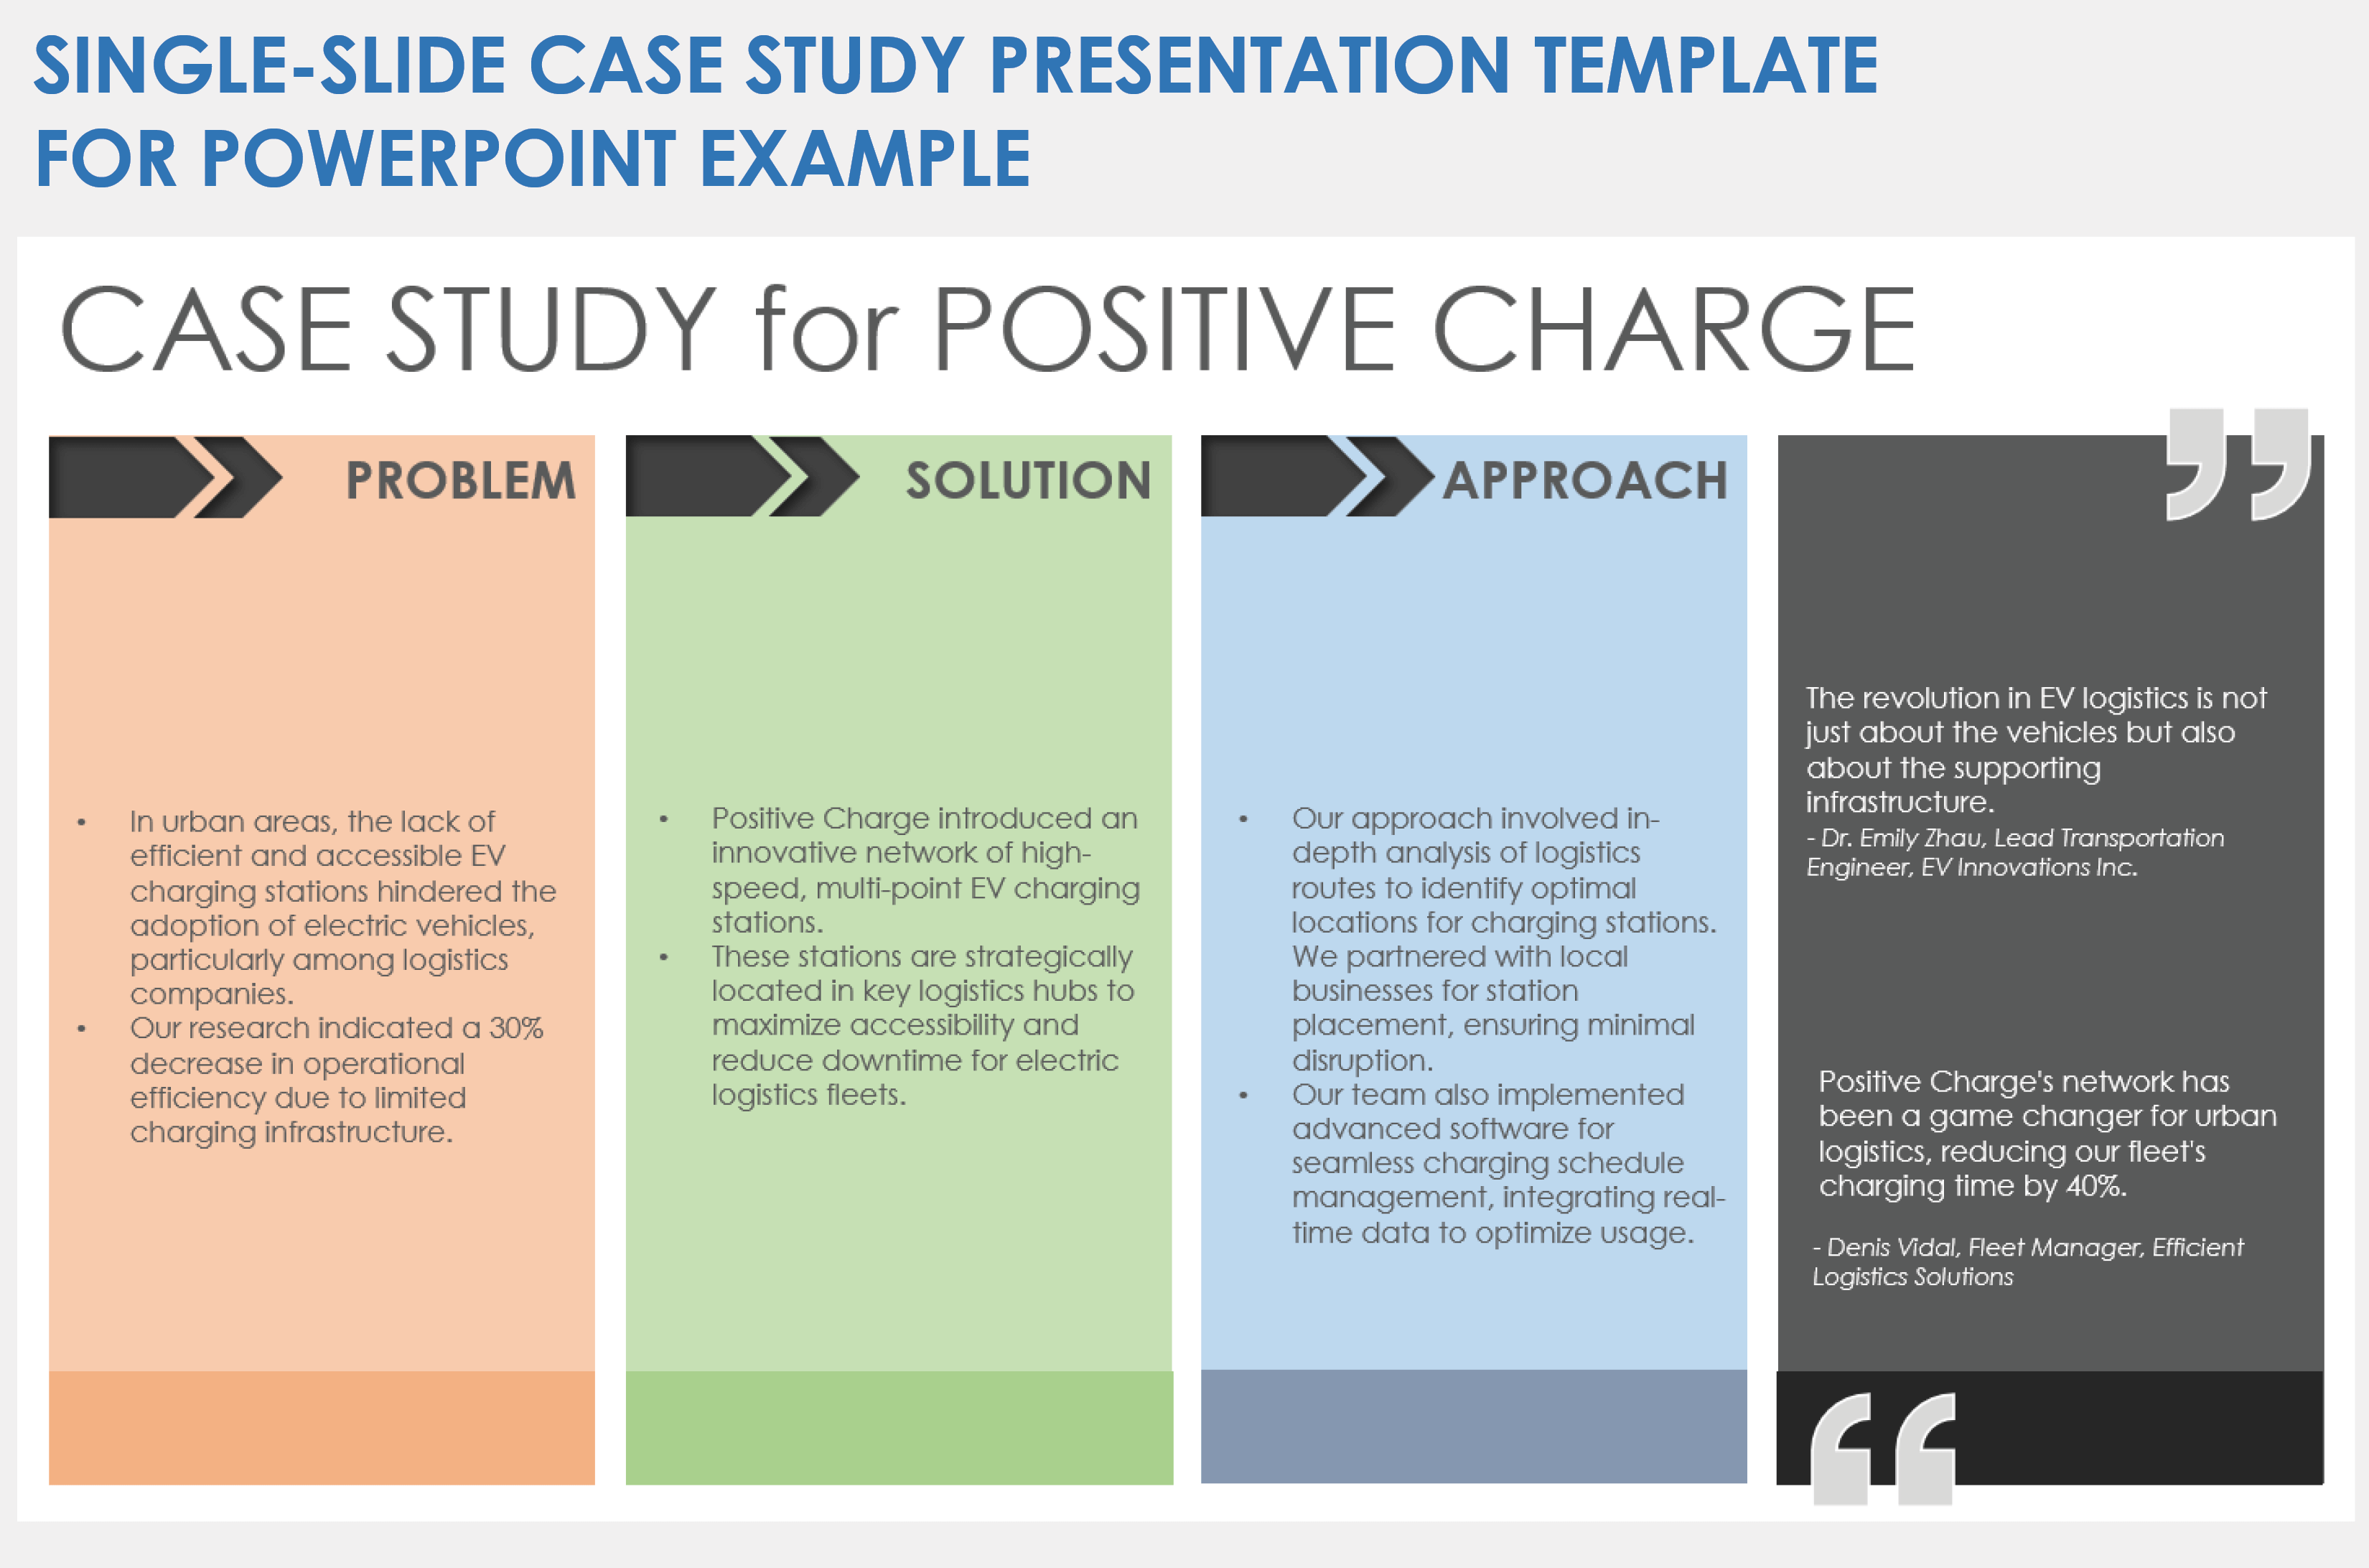 Single-Slide Case Study Presentation Example Template PowerPoint